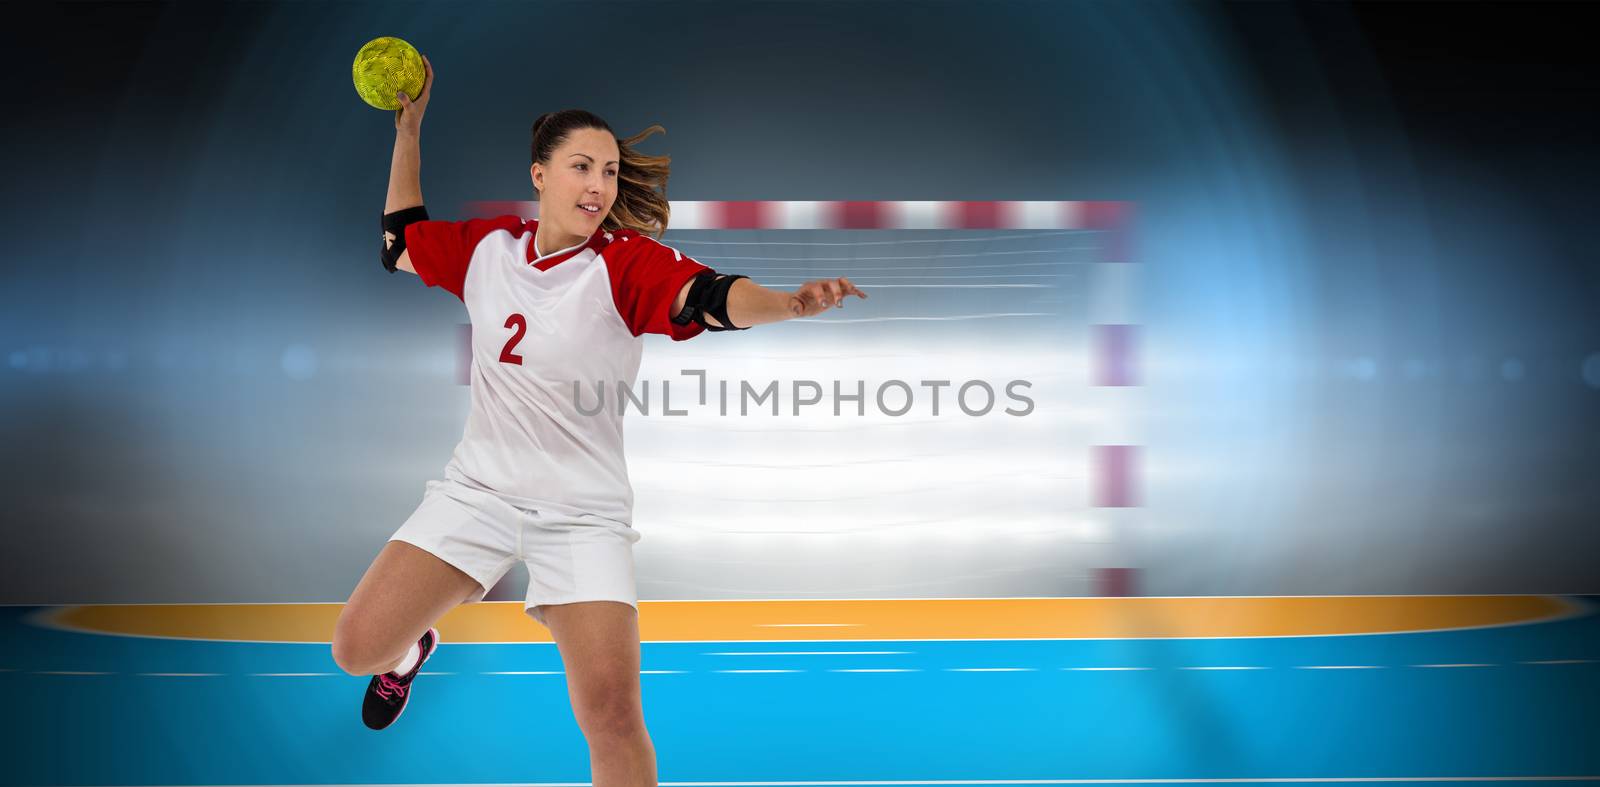 Composite image of sportswoman throwing a ball by Wavebreakmedia